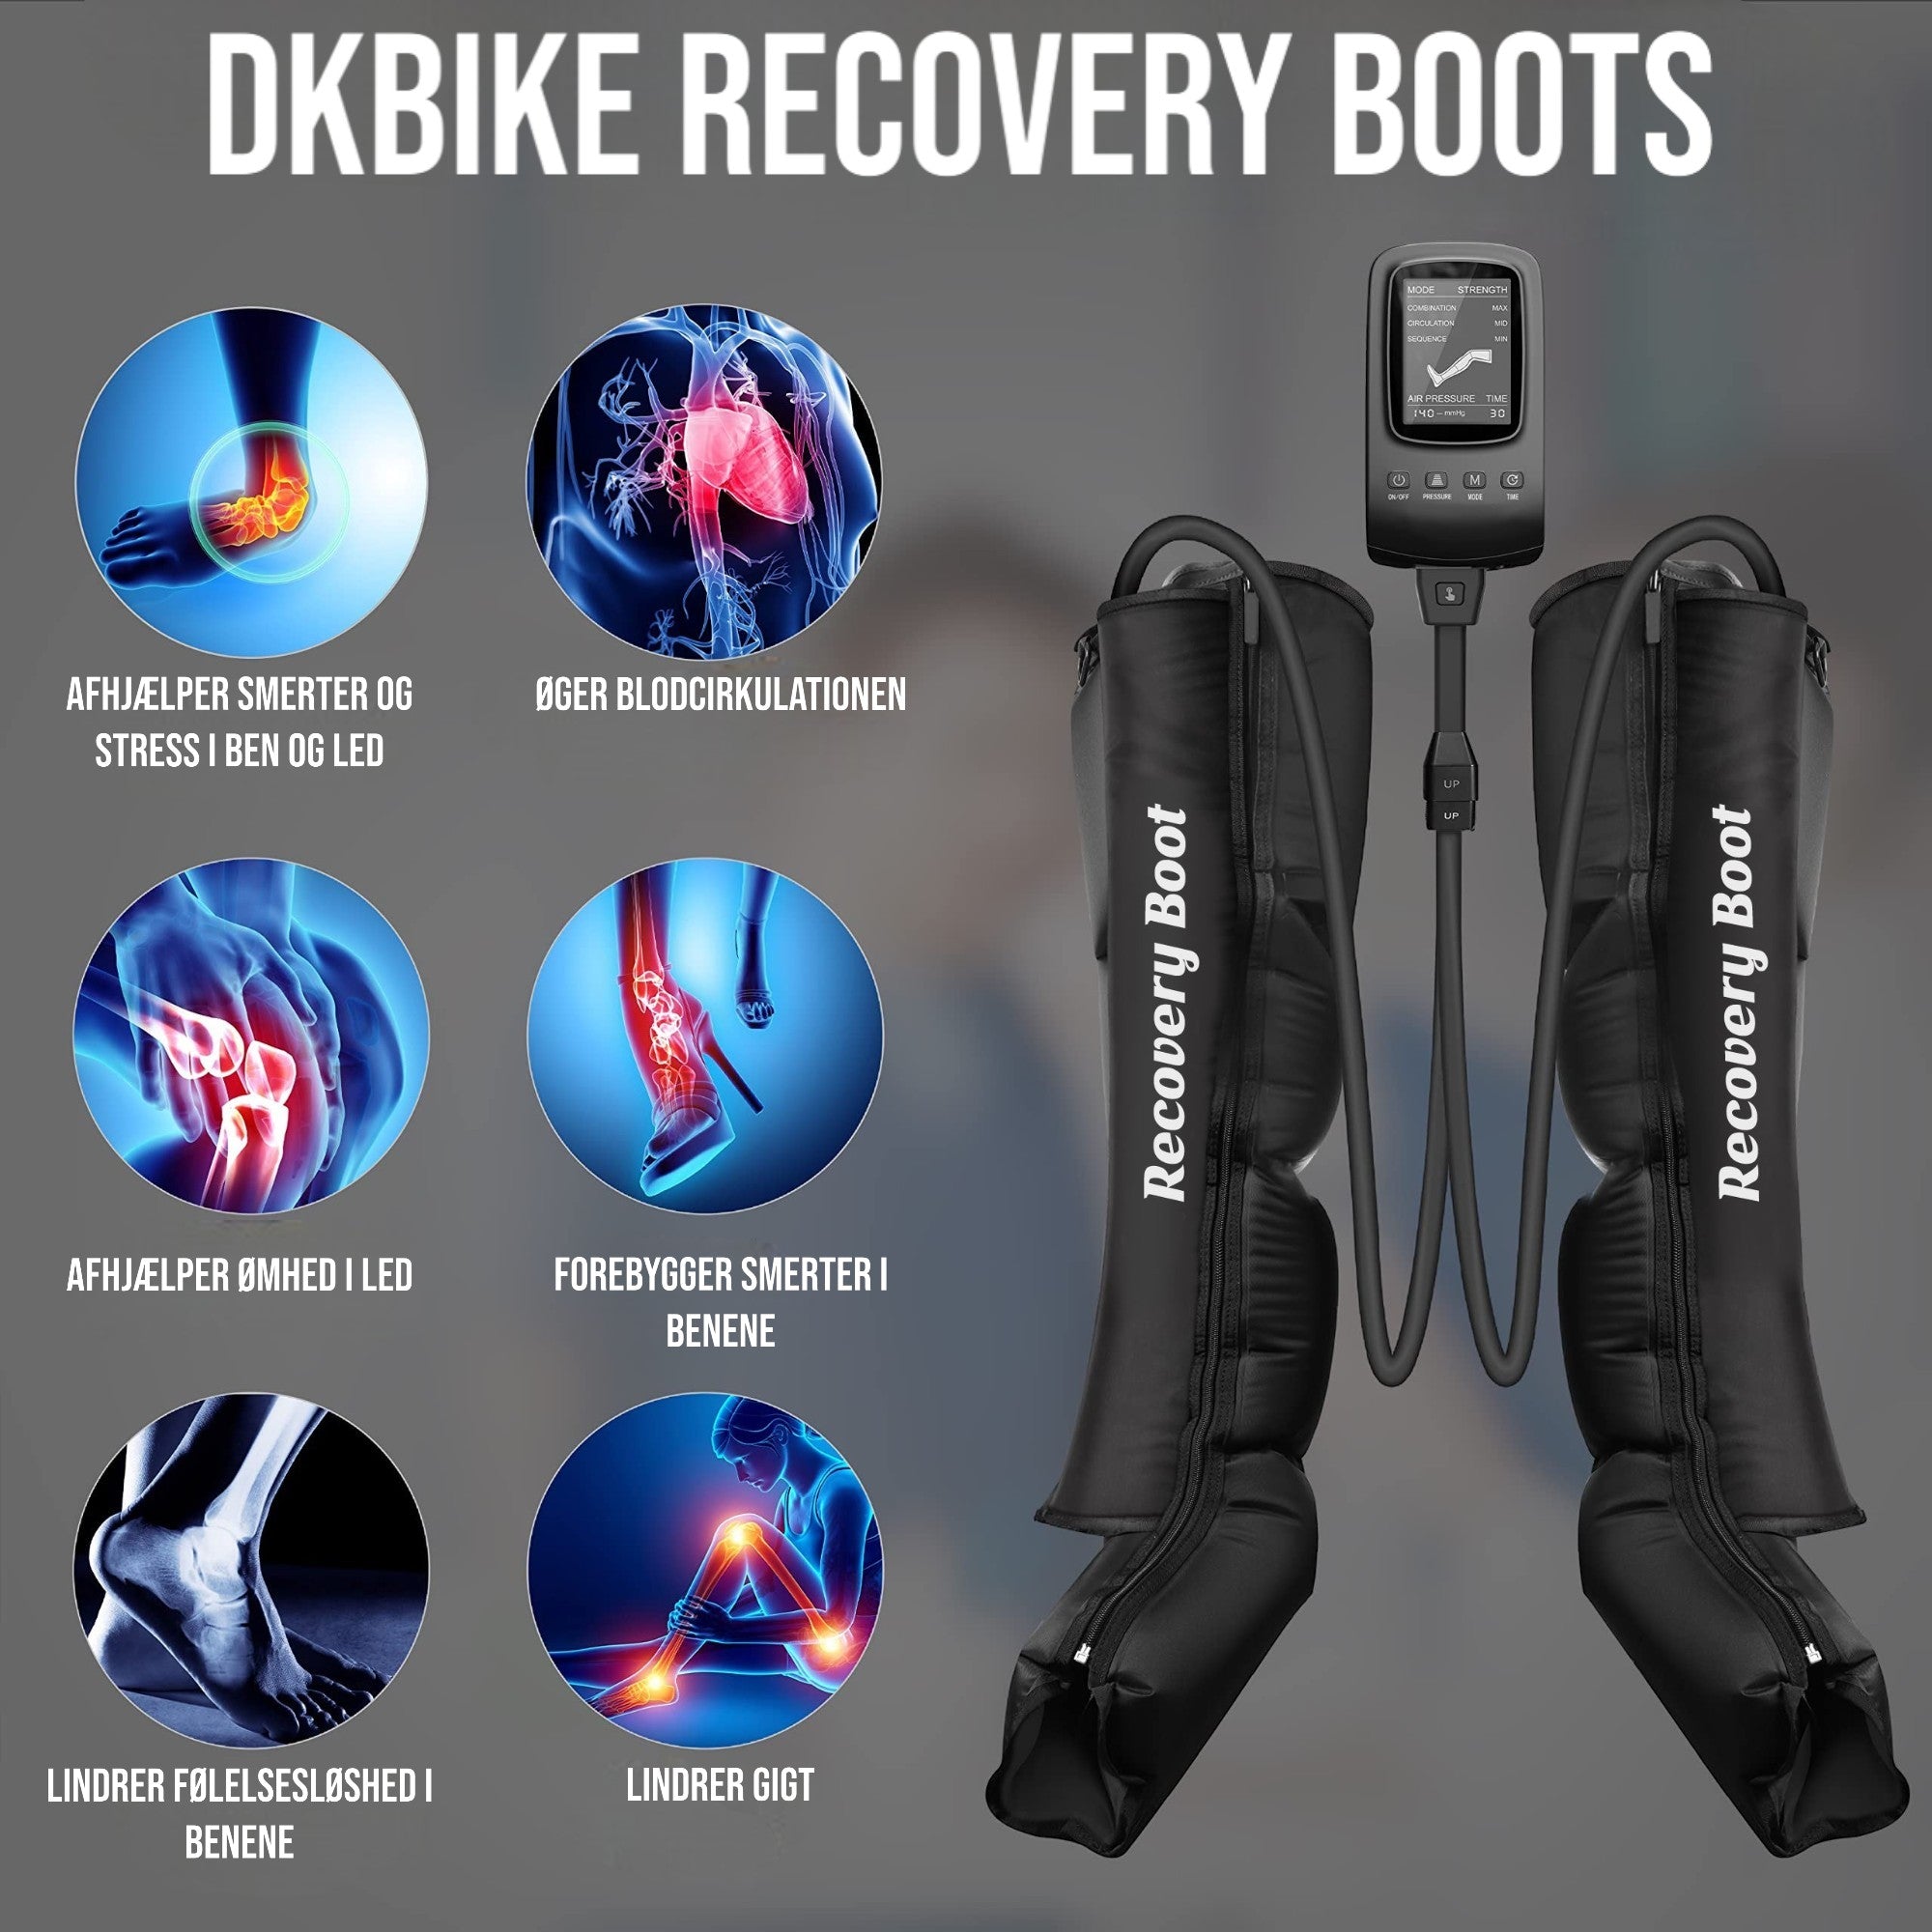 DKBIKE Recovery Boots